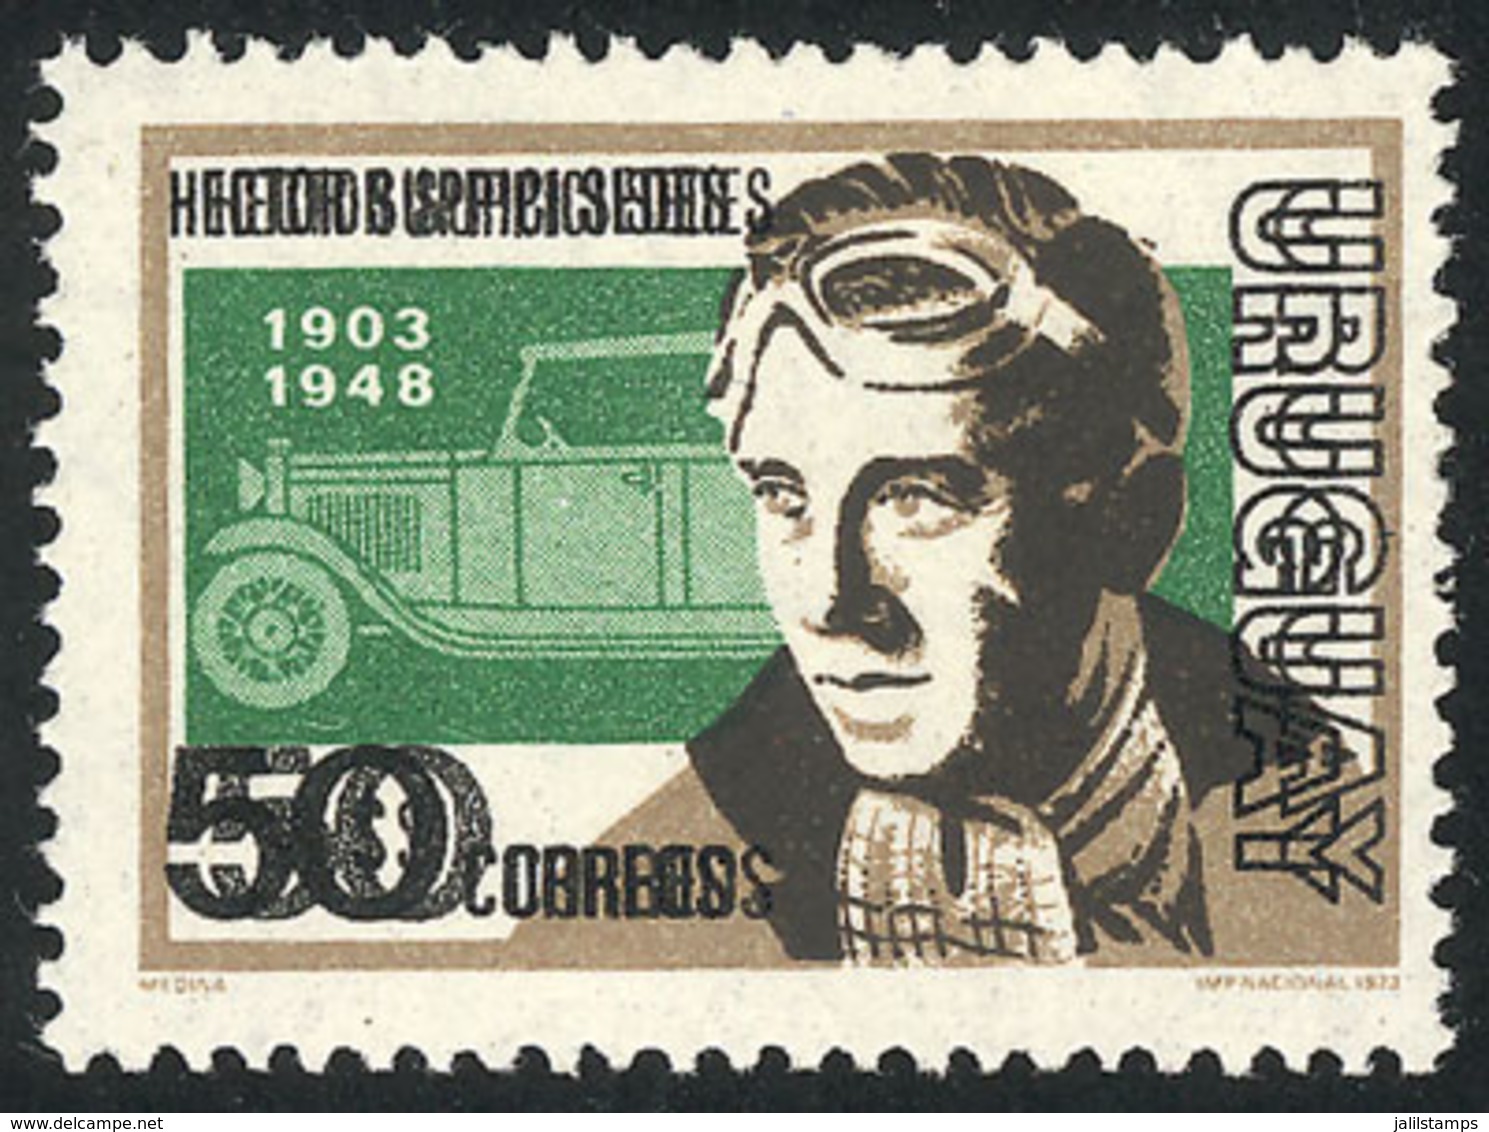 930 URUGUAY: Sc.875, 1974 Car Racing, With VARIETY: Double Impression Of Black Color, Excellent! - Uruguay